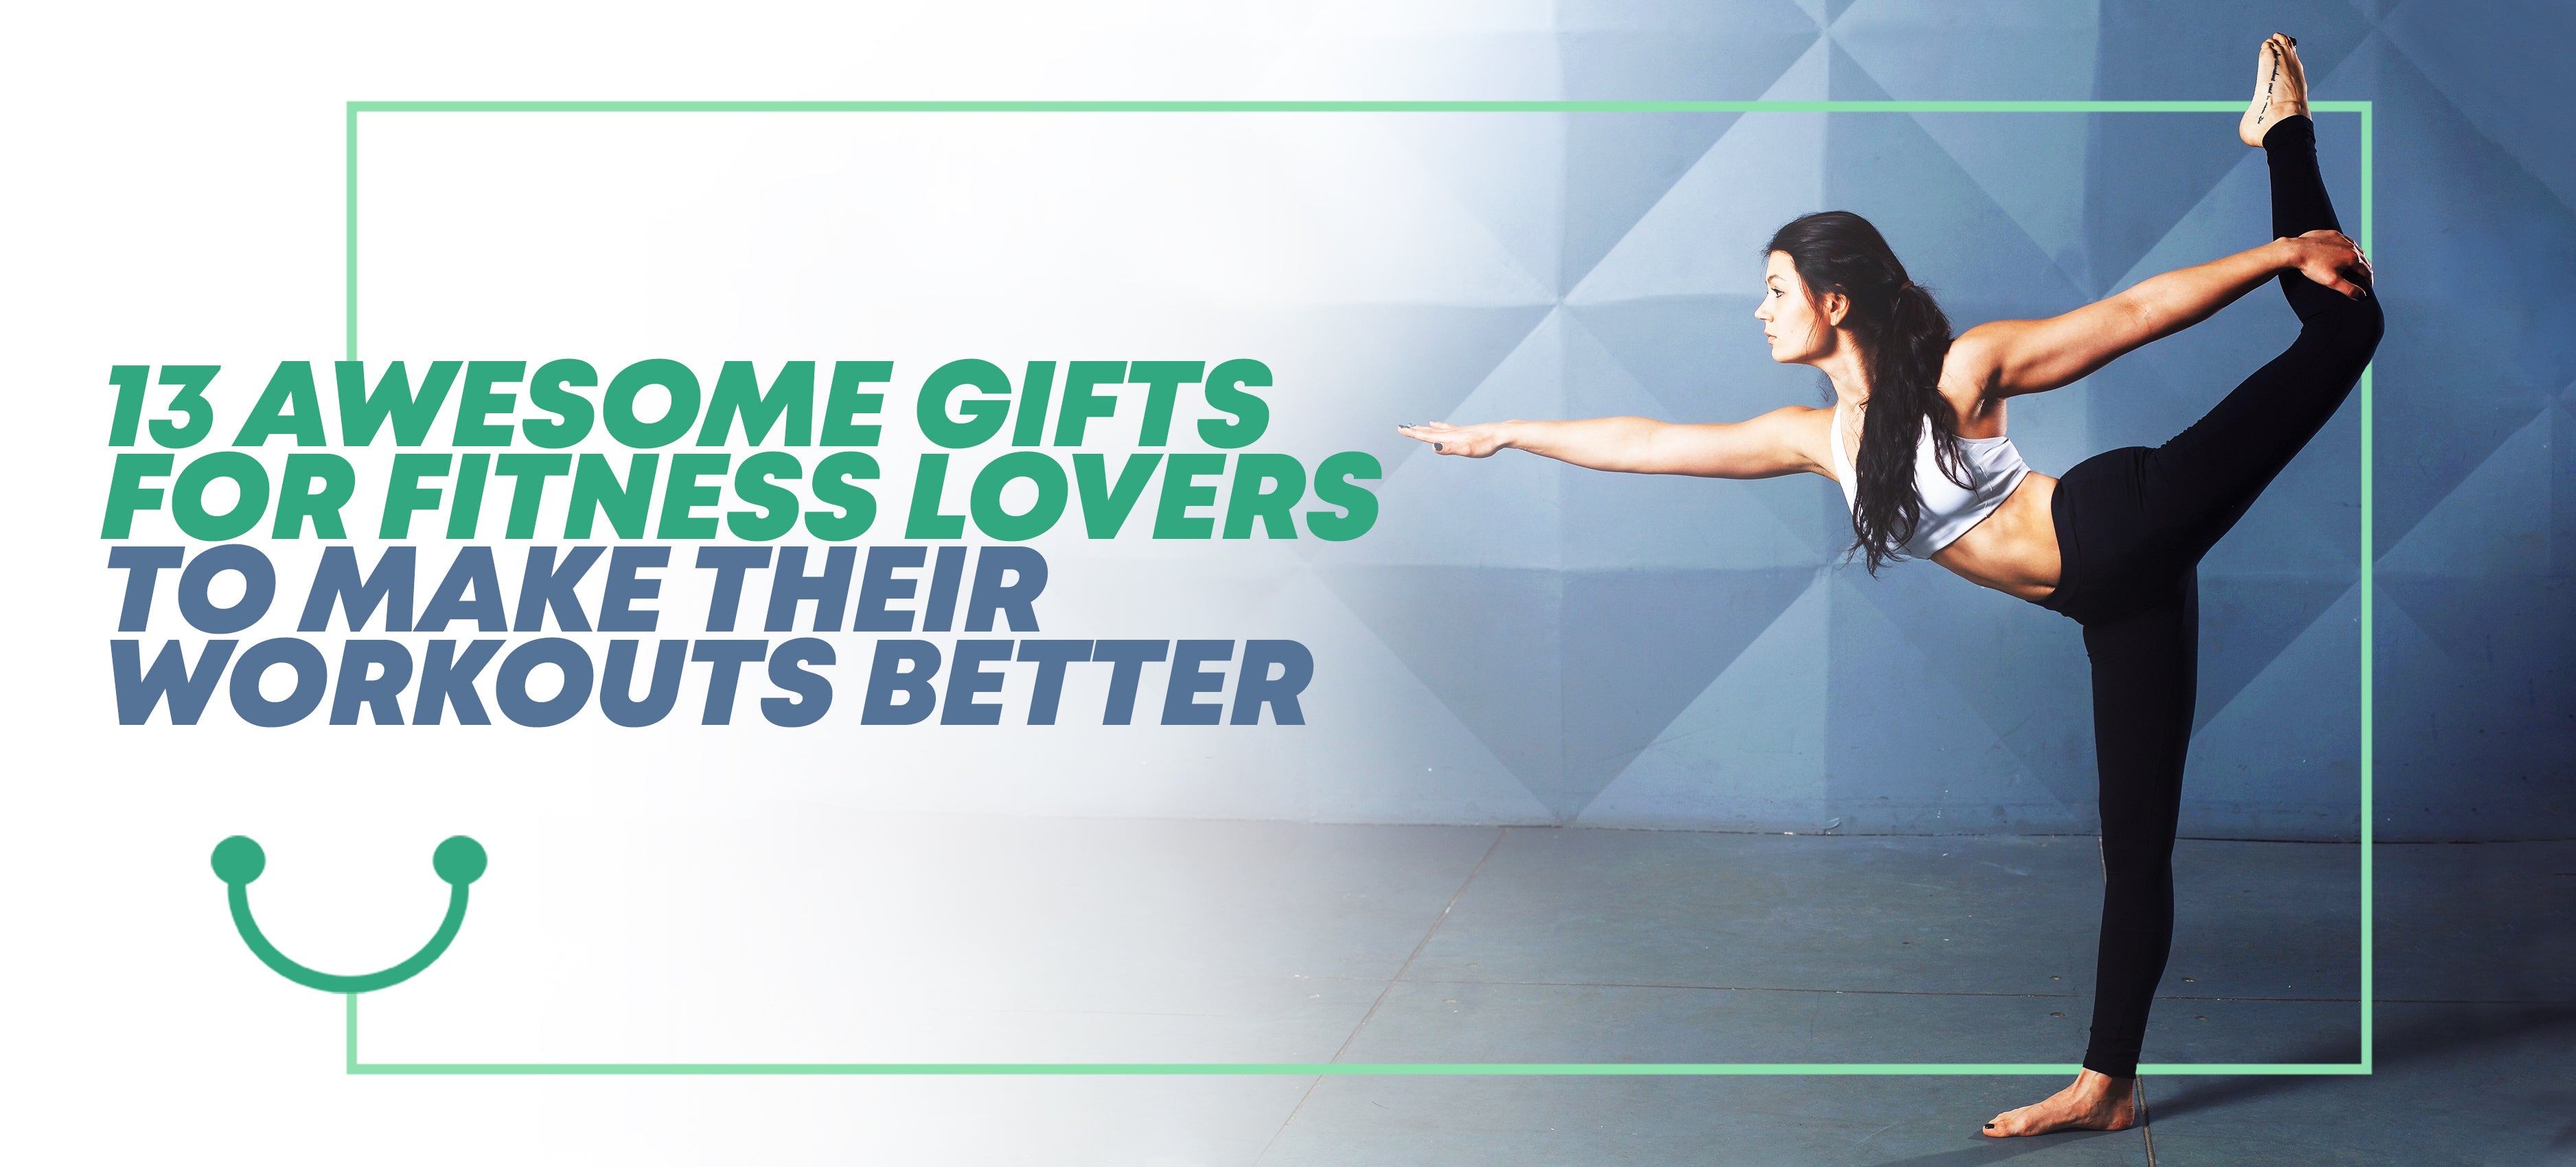 13 Awesome Gifts for Fitness Lovers to Make Their Workouts Better